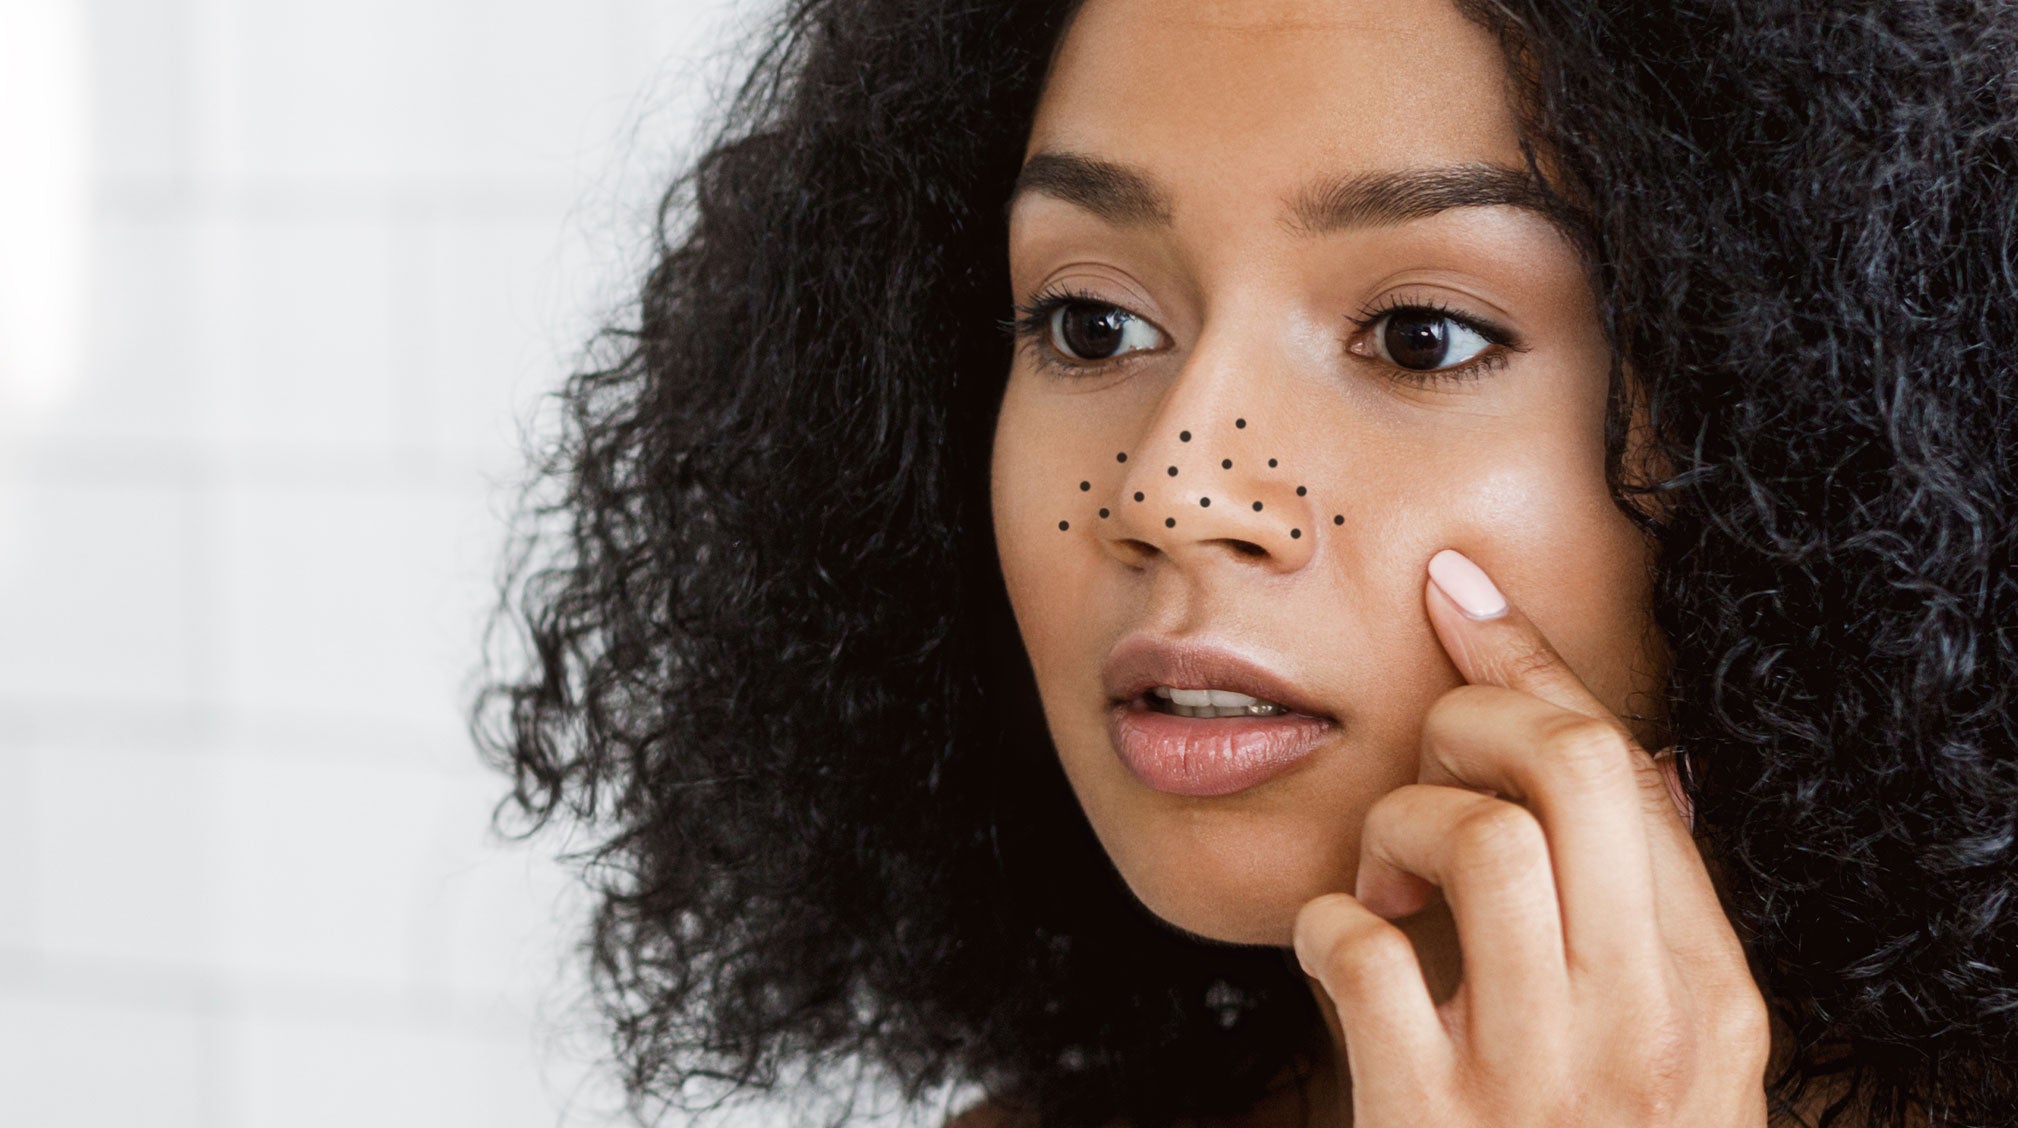 Dermatologists Explain How to Get Rid of Blackheads